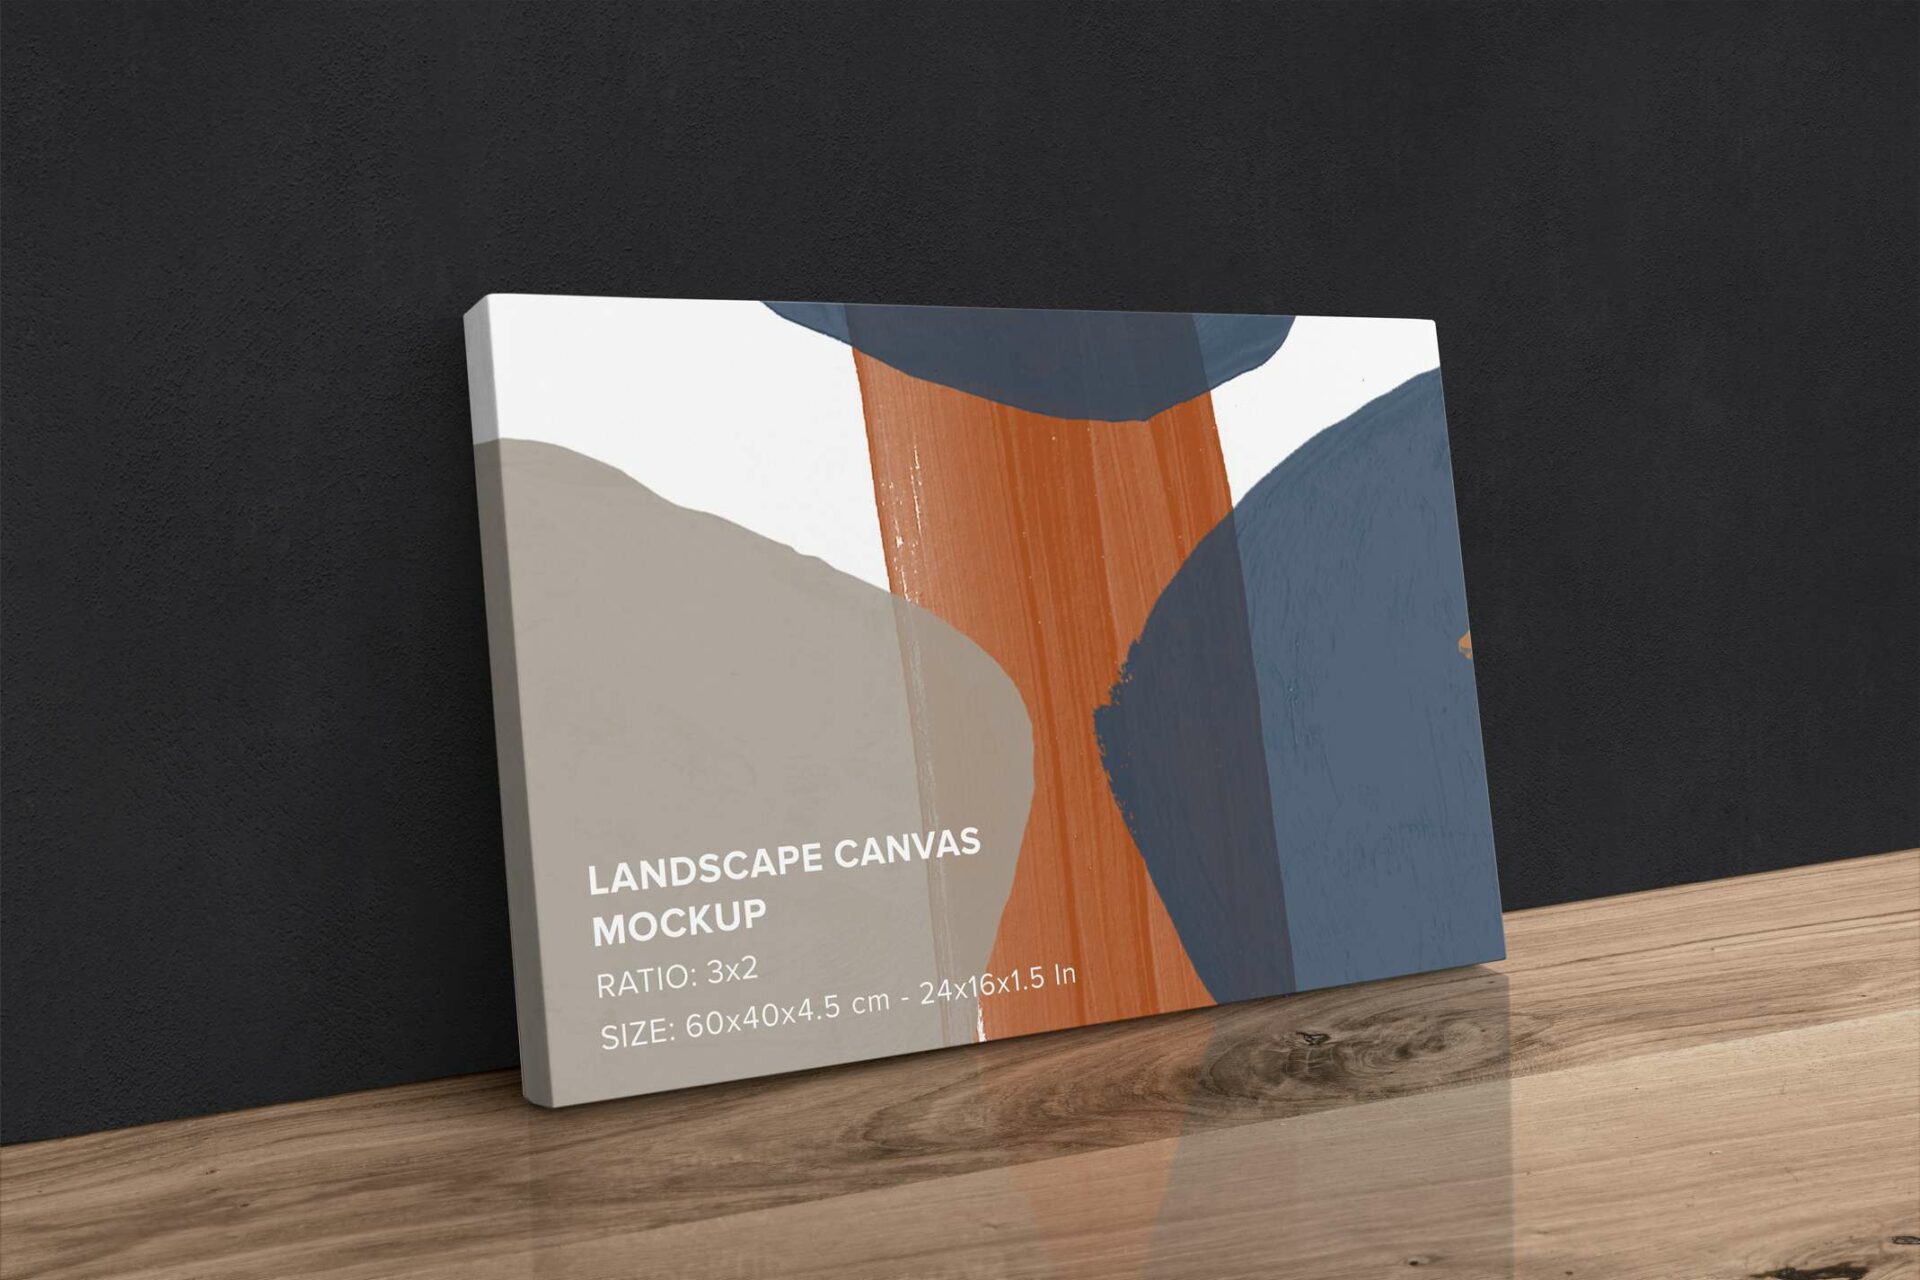 Leaning Landscape Canvas Ratio 3x2 Mockup - Left 1.5 In Wrap